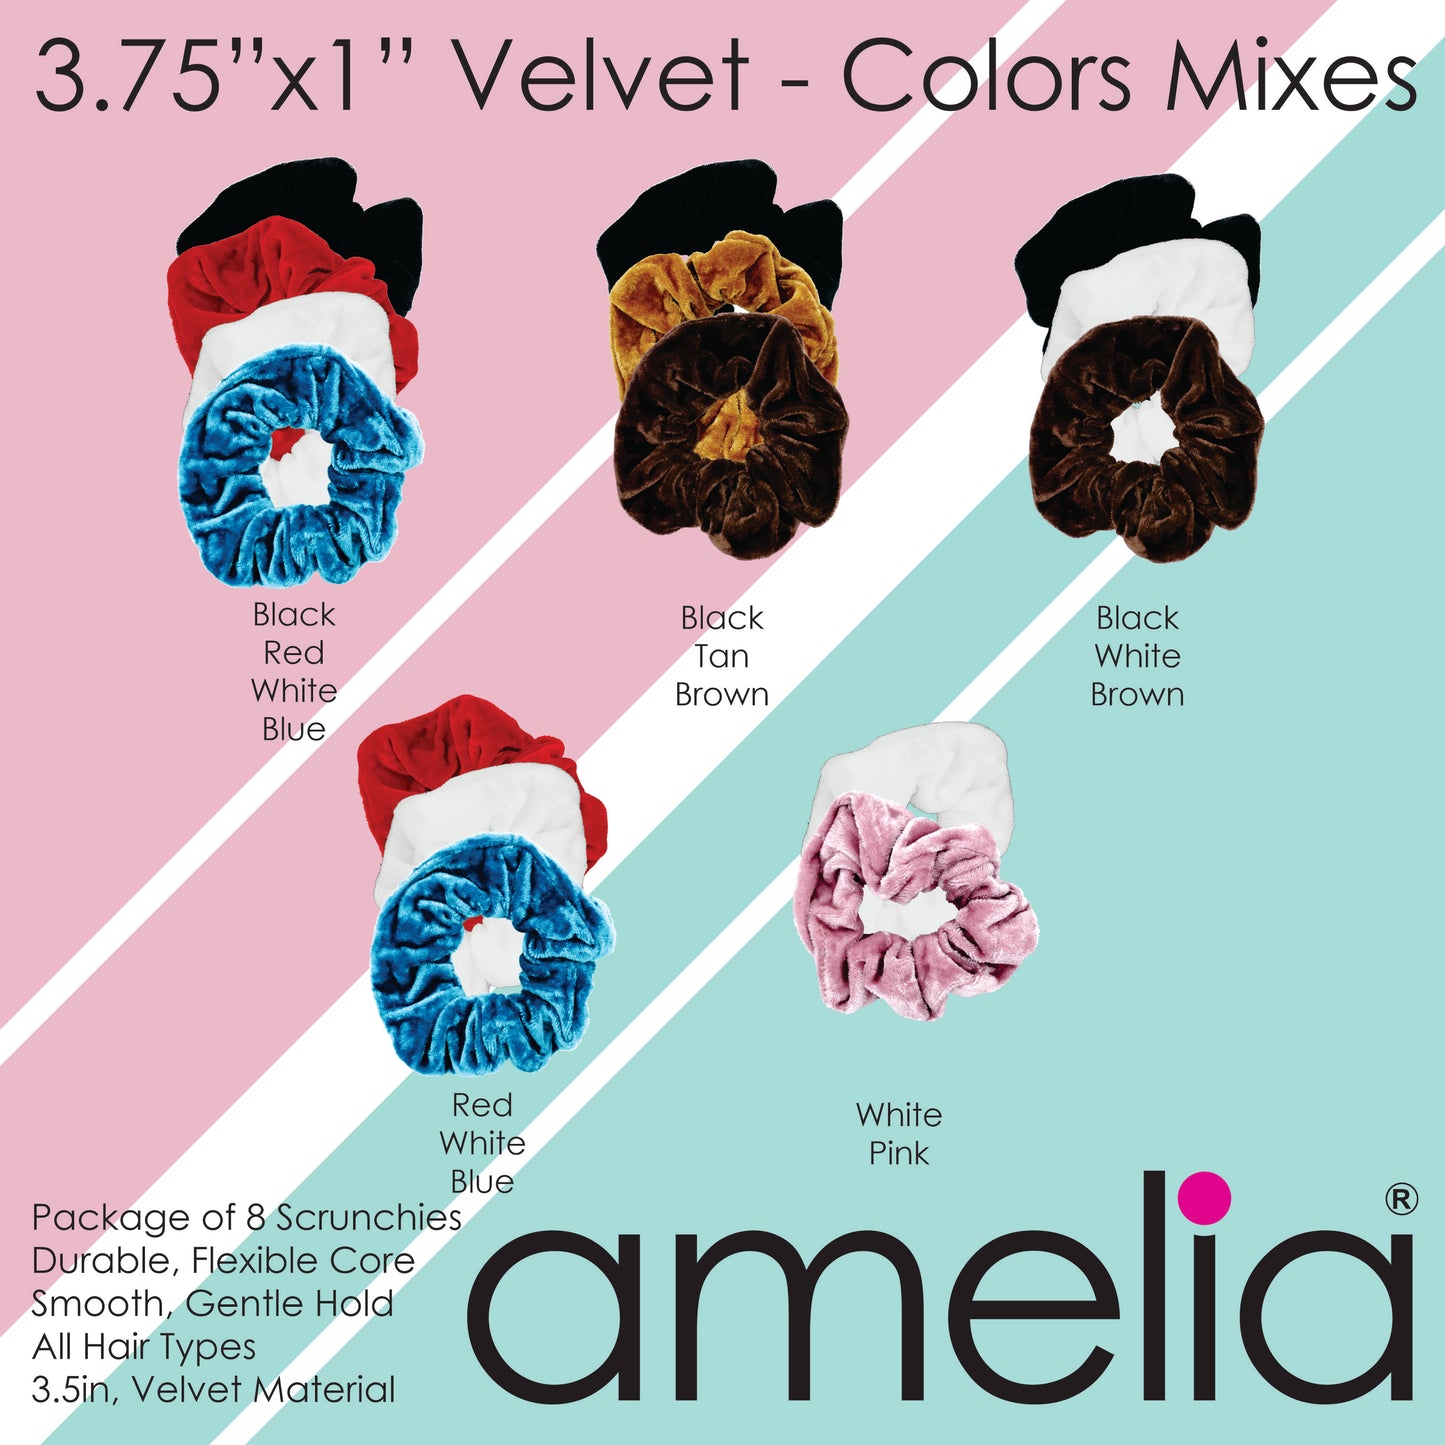 Amelia Beauty Products, Black, Red, White and Blue Velvet Velvet Scrunchies, 3.5in Diameter, Gentle on Hair, Strong Hold, No Snag, No Dents or Creases. 8 Pack